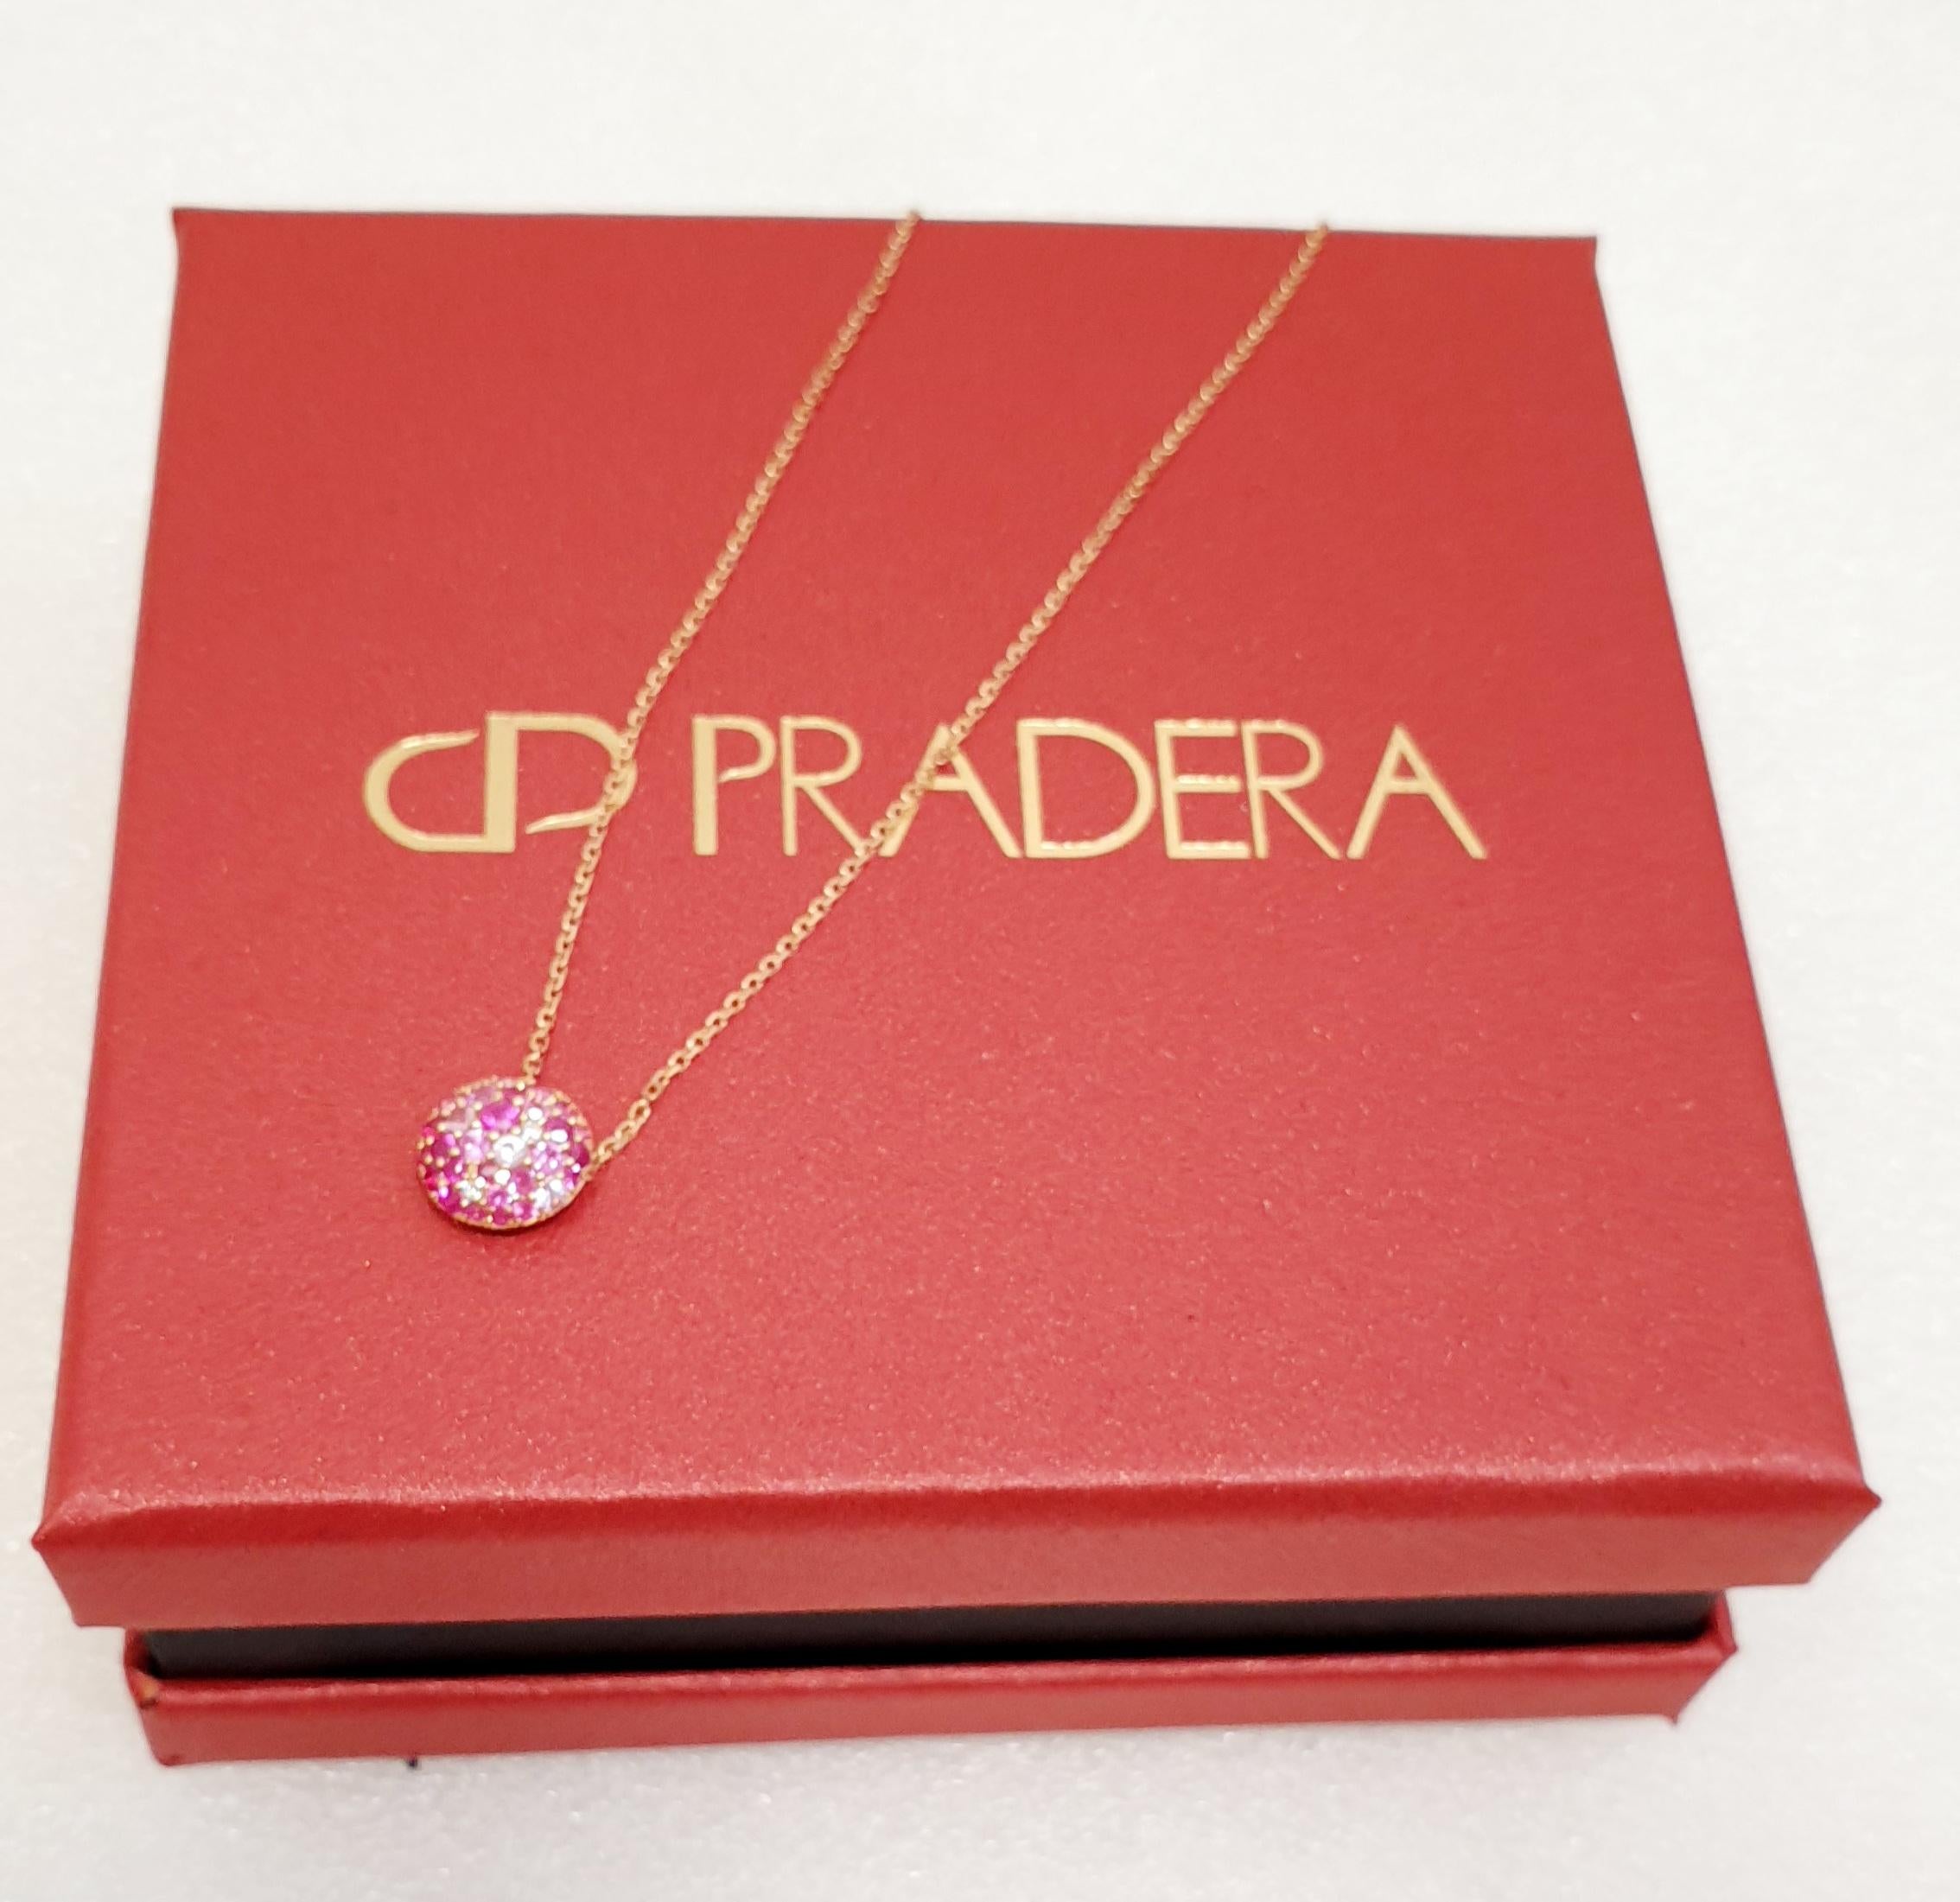  18 karat Rose Gold Chain with pavée of Ruby and Diamond Pendant For Sale 1